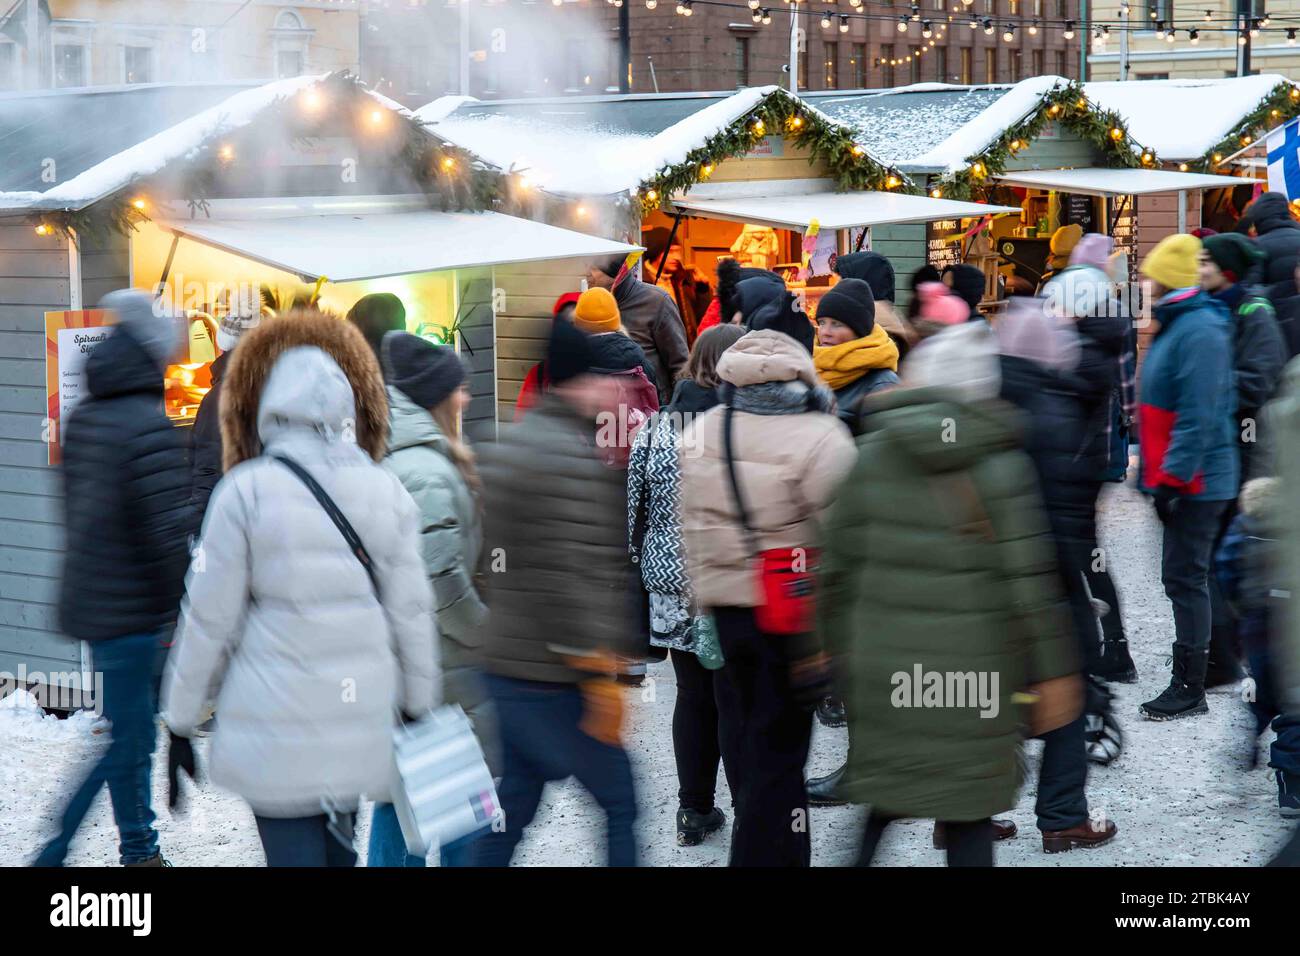 Blurred motions of people at Tuomaan markkinat or Helsinki Christmas Market on Senate Square in Helsinki, Finland Stock Photo